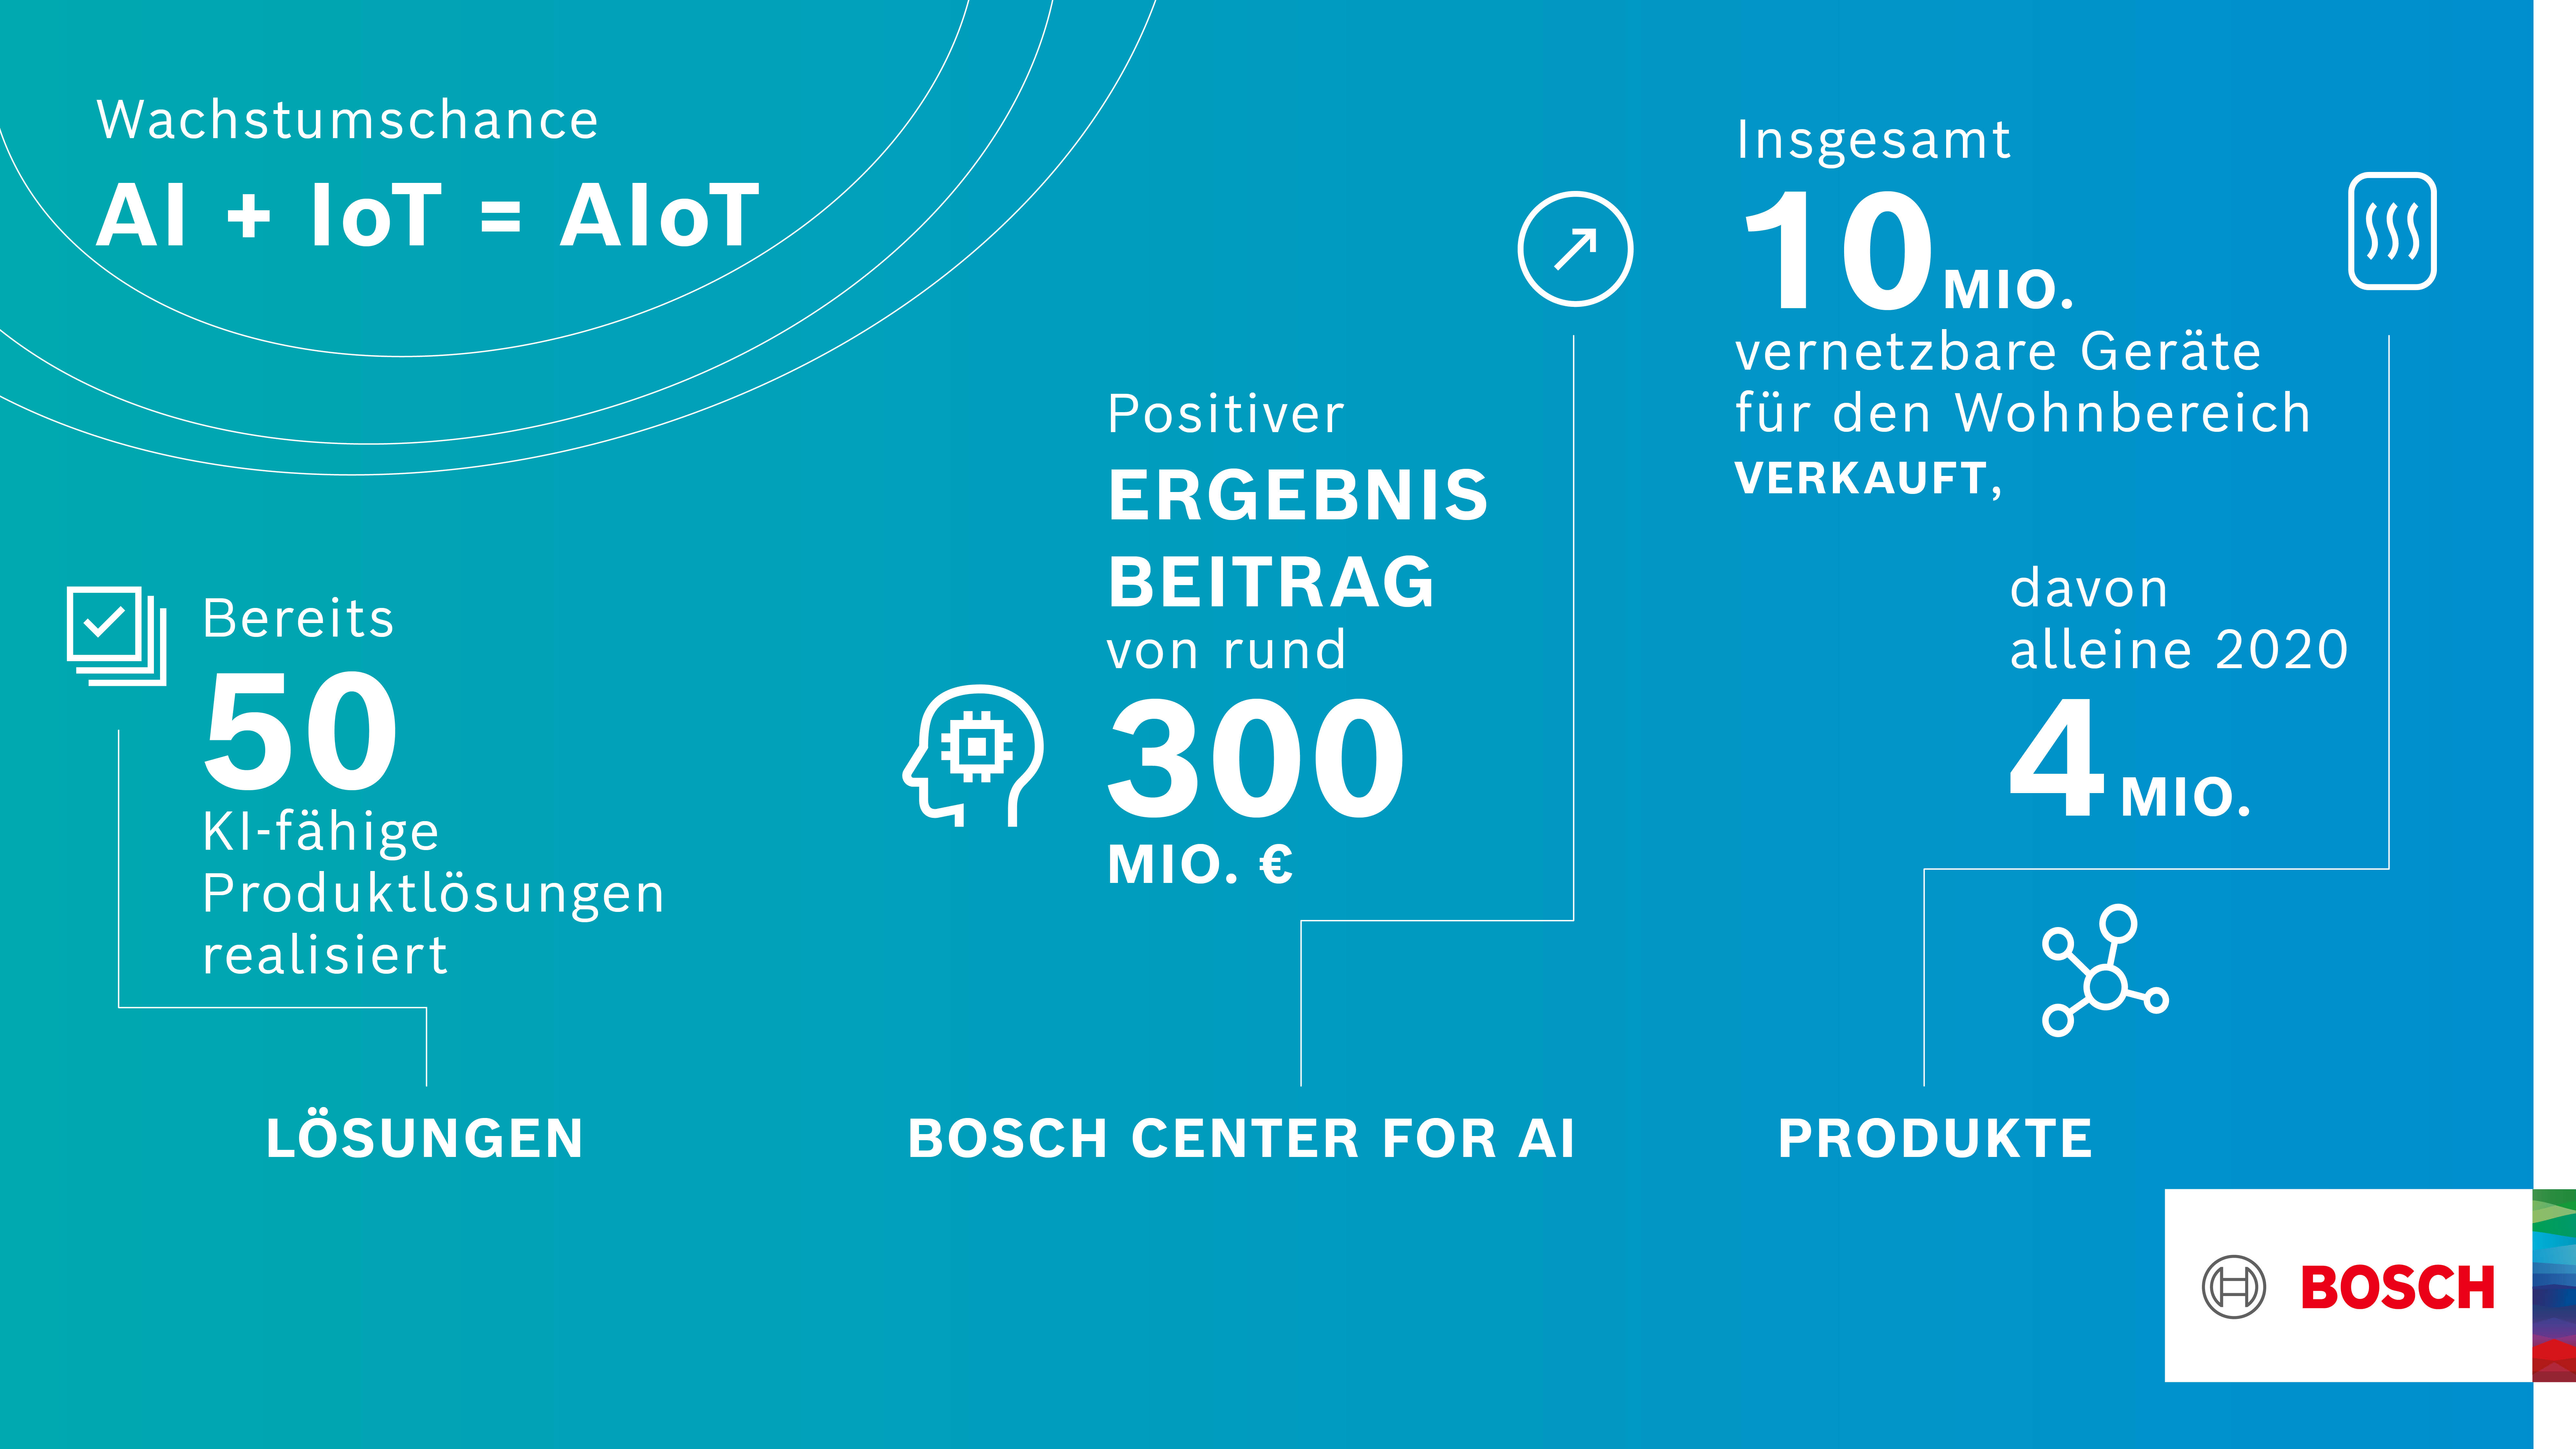 Bosch believes AIoT, electrification, and green hydrogen are the way forward